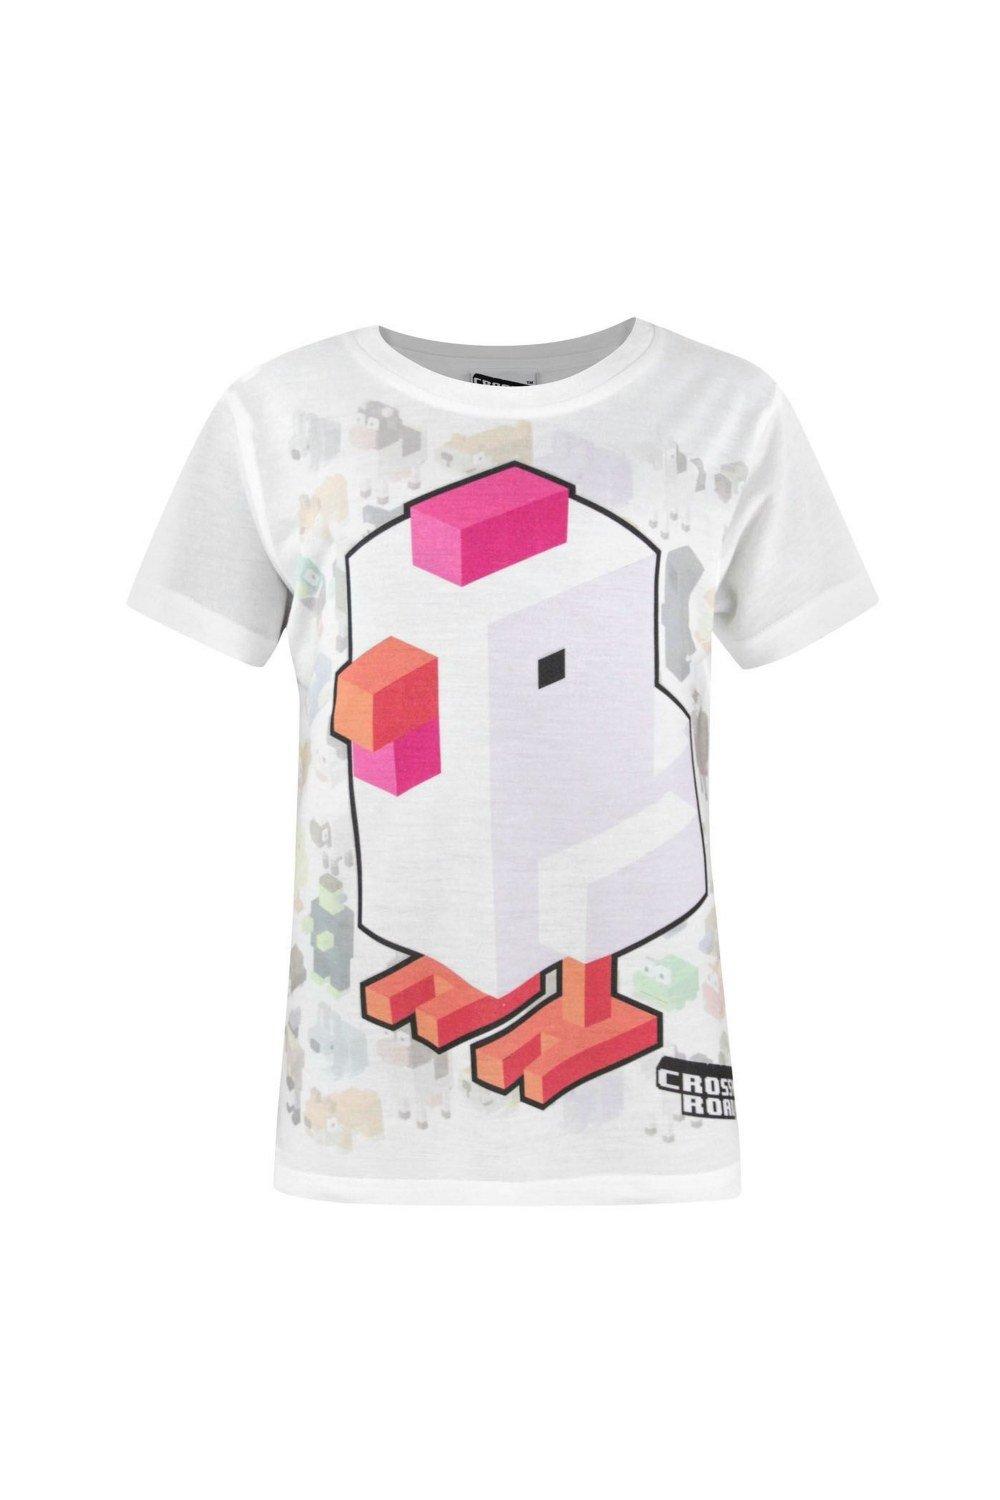 Crossy Road Official All-Over Character Sublimation Design T-Shirt